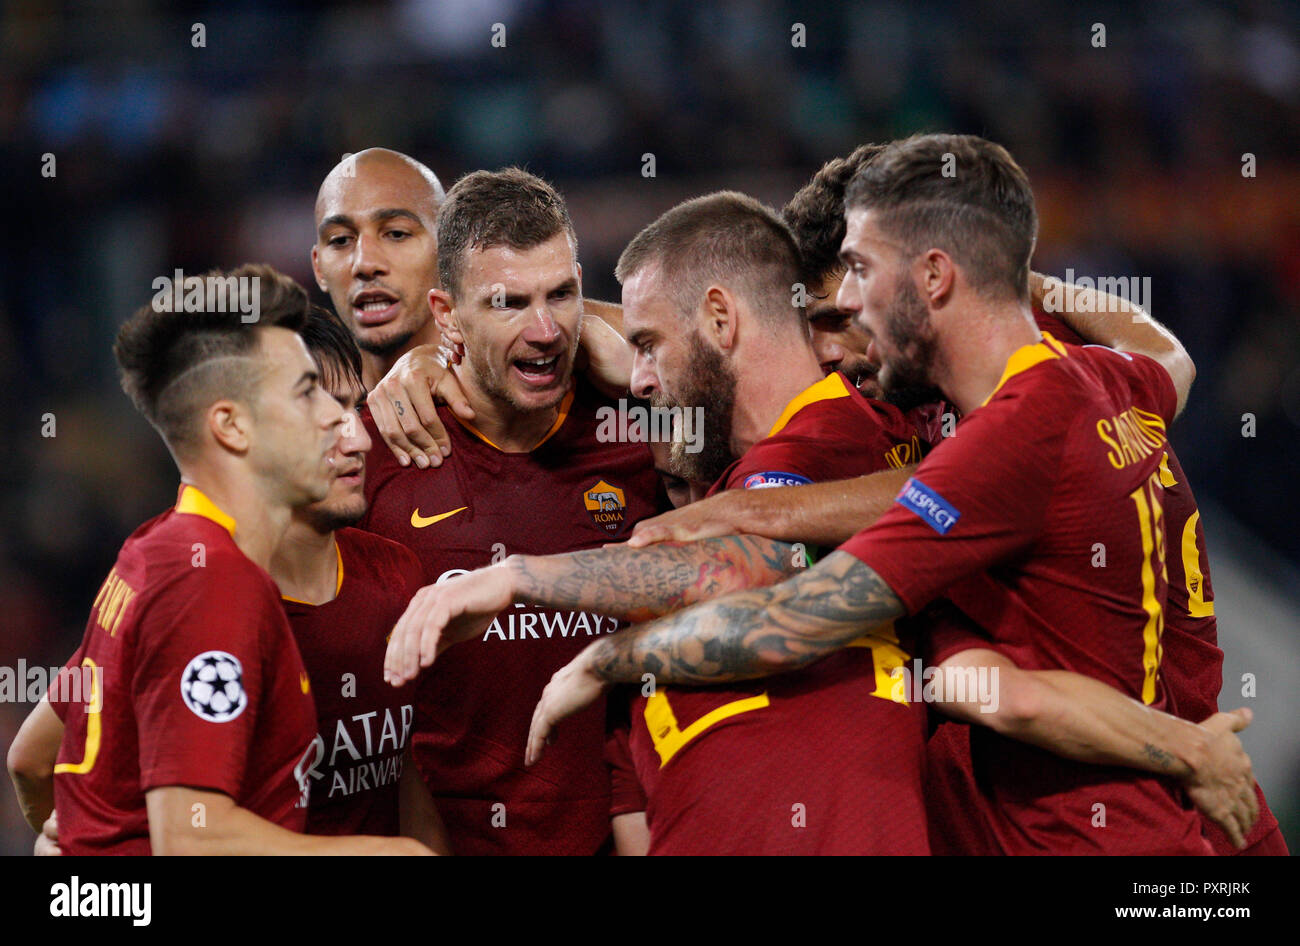 Rome, Italy, 23rd October, 2018. Roma's Edin Dzeko, fourth from left, celebrates with his teammates after scoring his second goal during the Champions League Group G soccer match between Roma and CSKA Moscow at the Olympic Stadium. Roma won 3-0. © Riccardo De Luca UPDATE IMAGES/ Alamy Live News Stock Photo